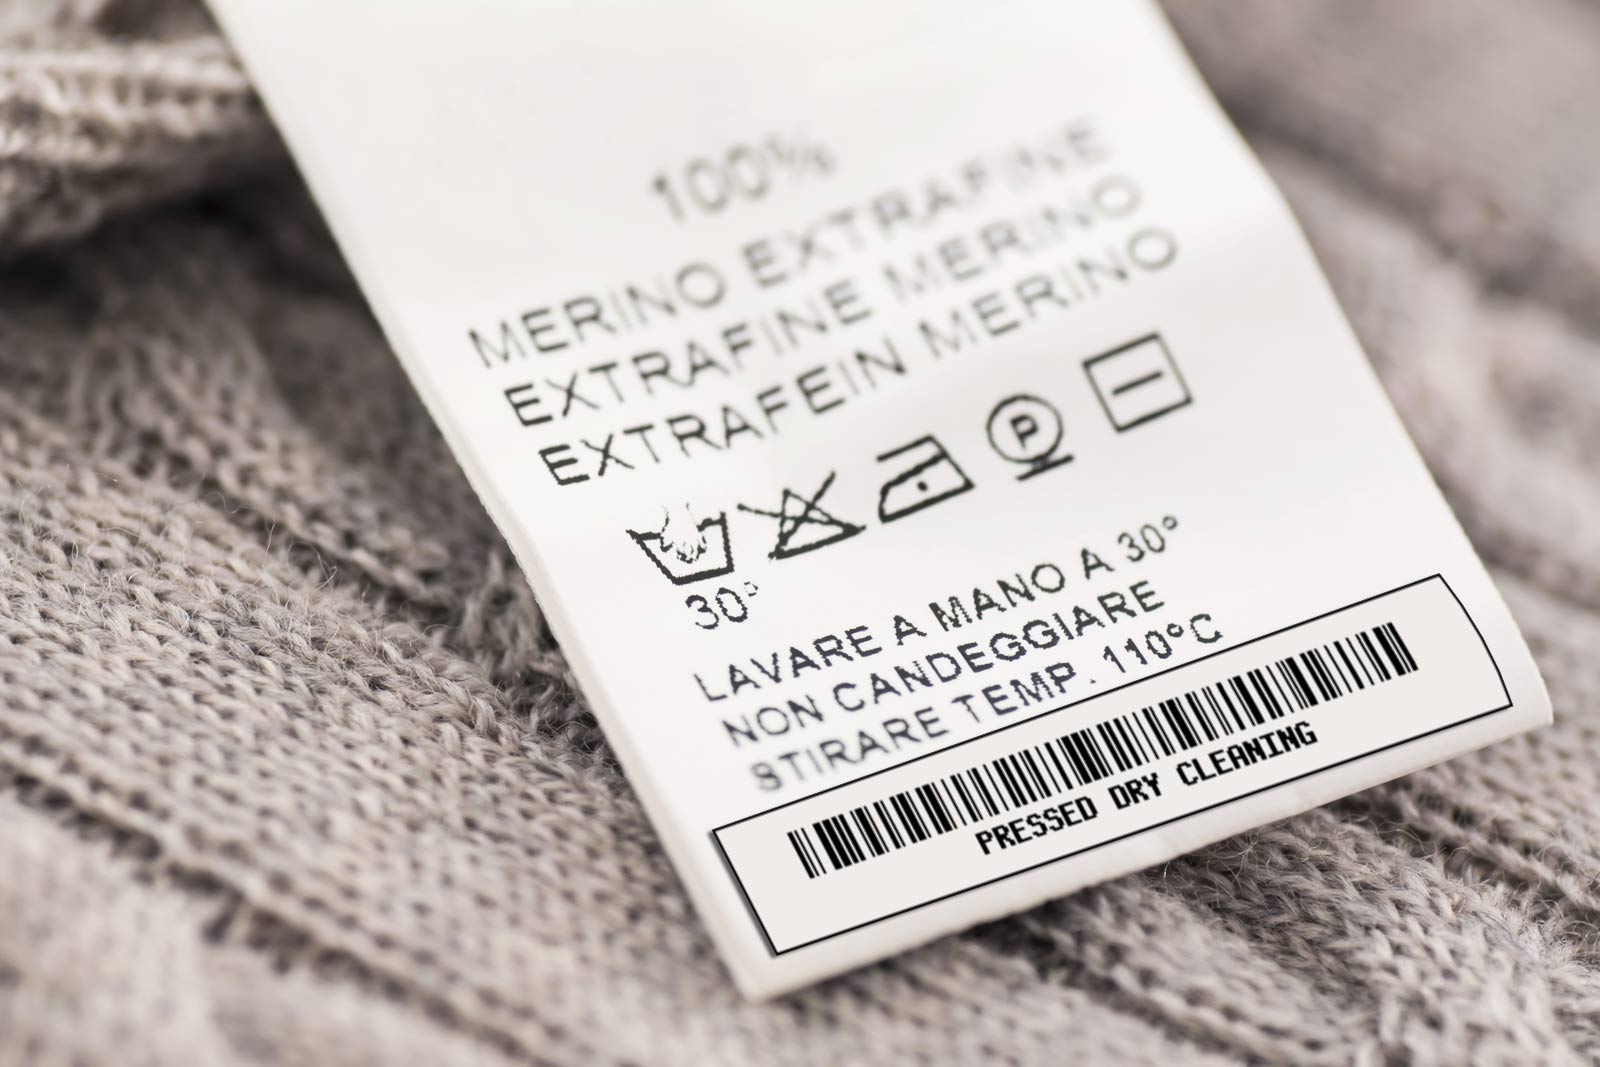 Barcoded dry cleaning